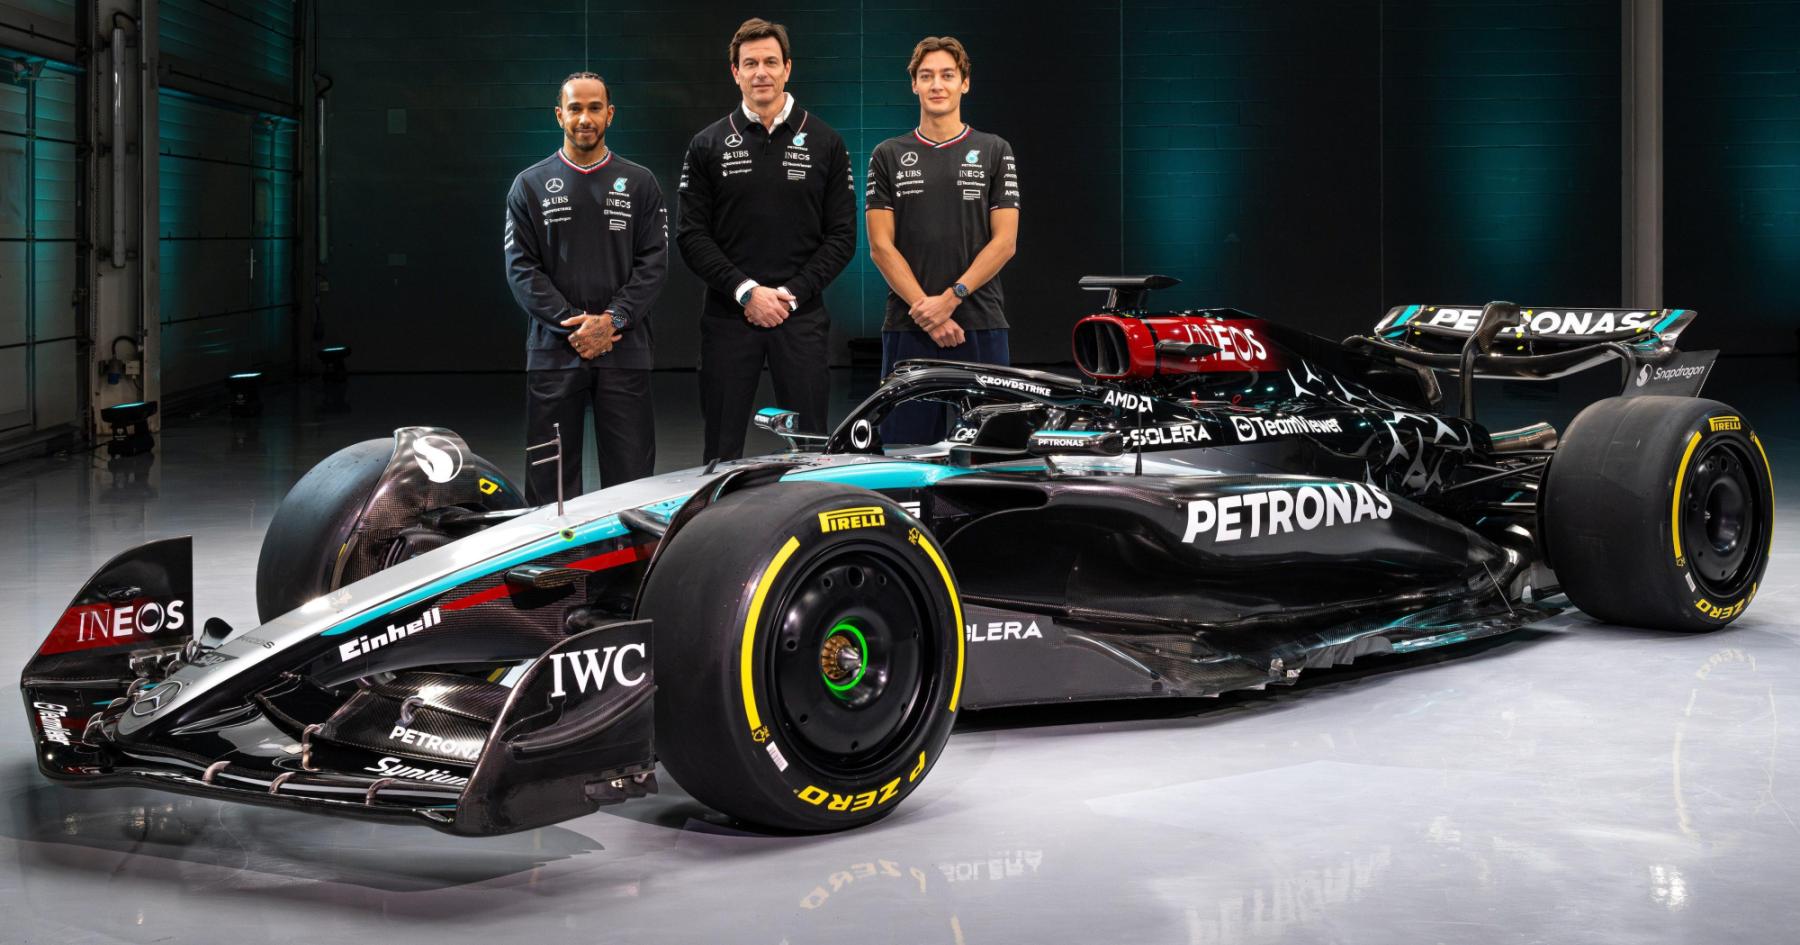 Mercedes Racing Team: Navigating the Future with Determination, Not Prediction